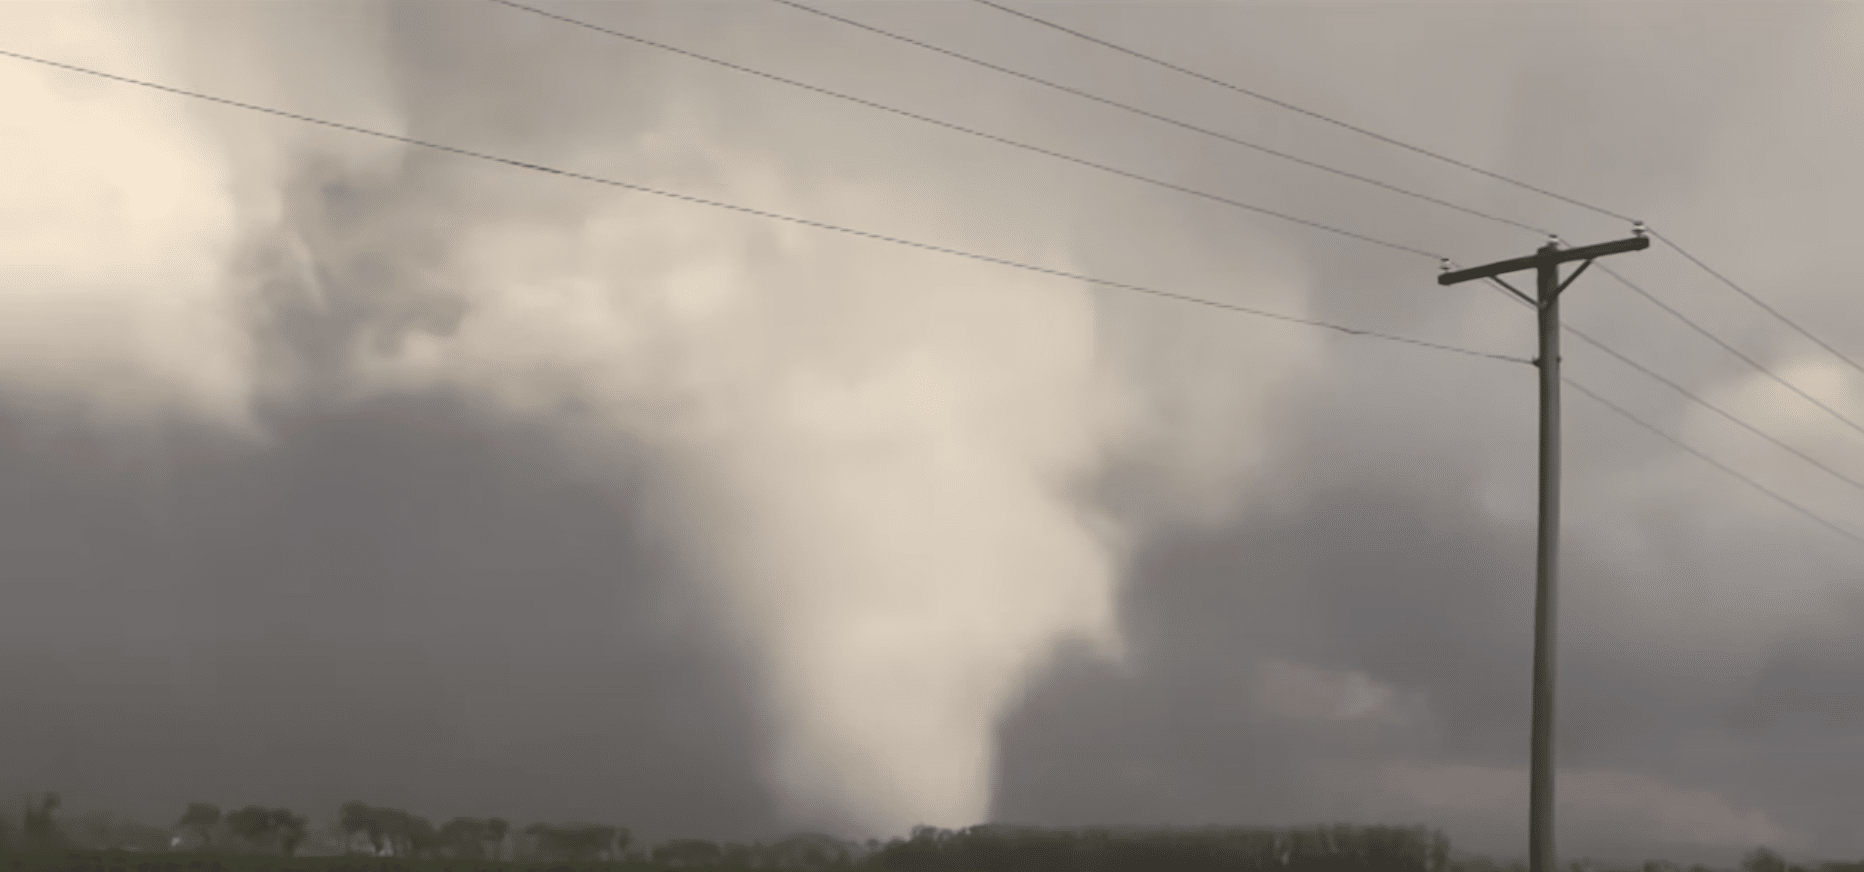 (WATCH) Tornadoes ravage Chicago area, leave thousands without power